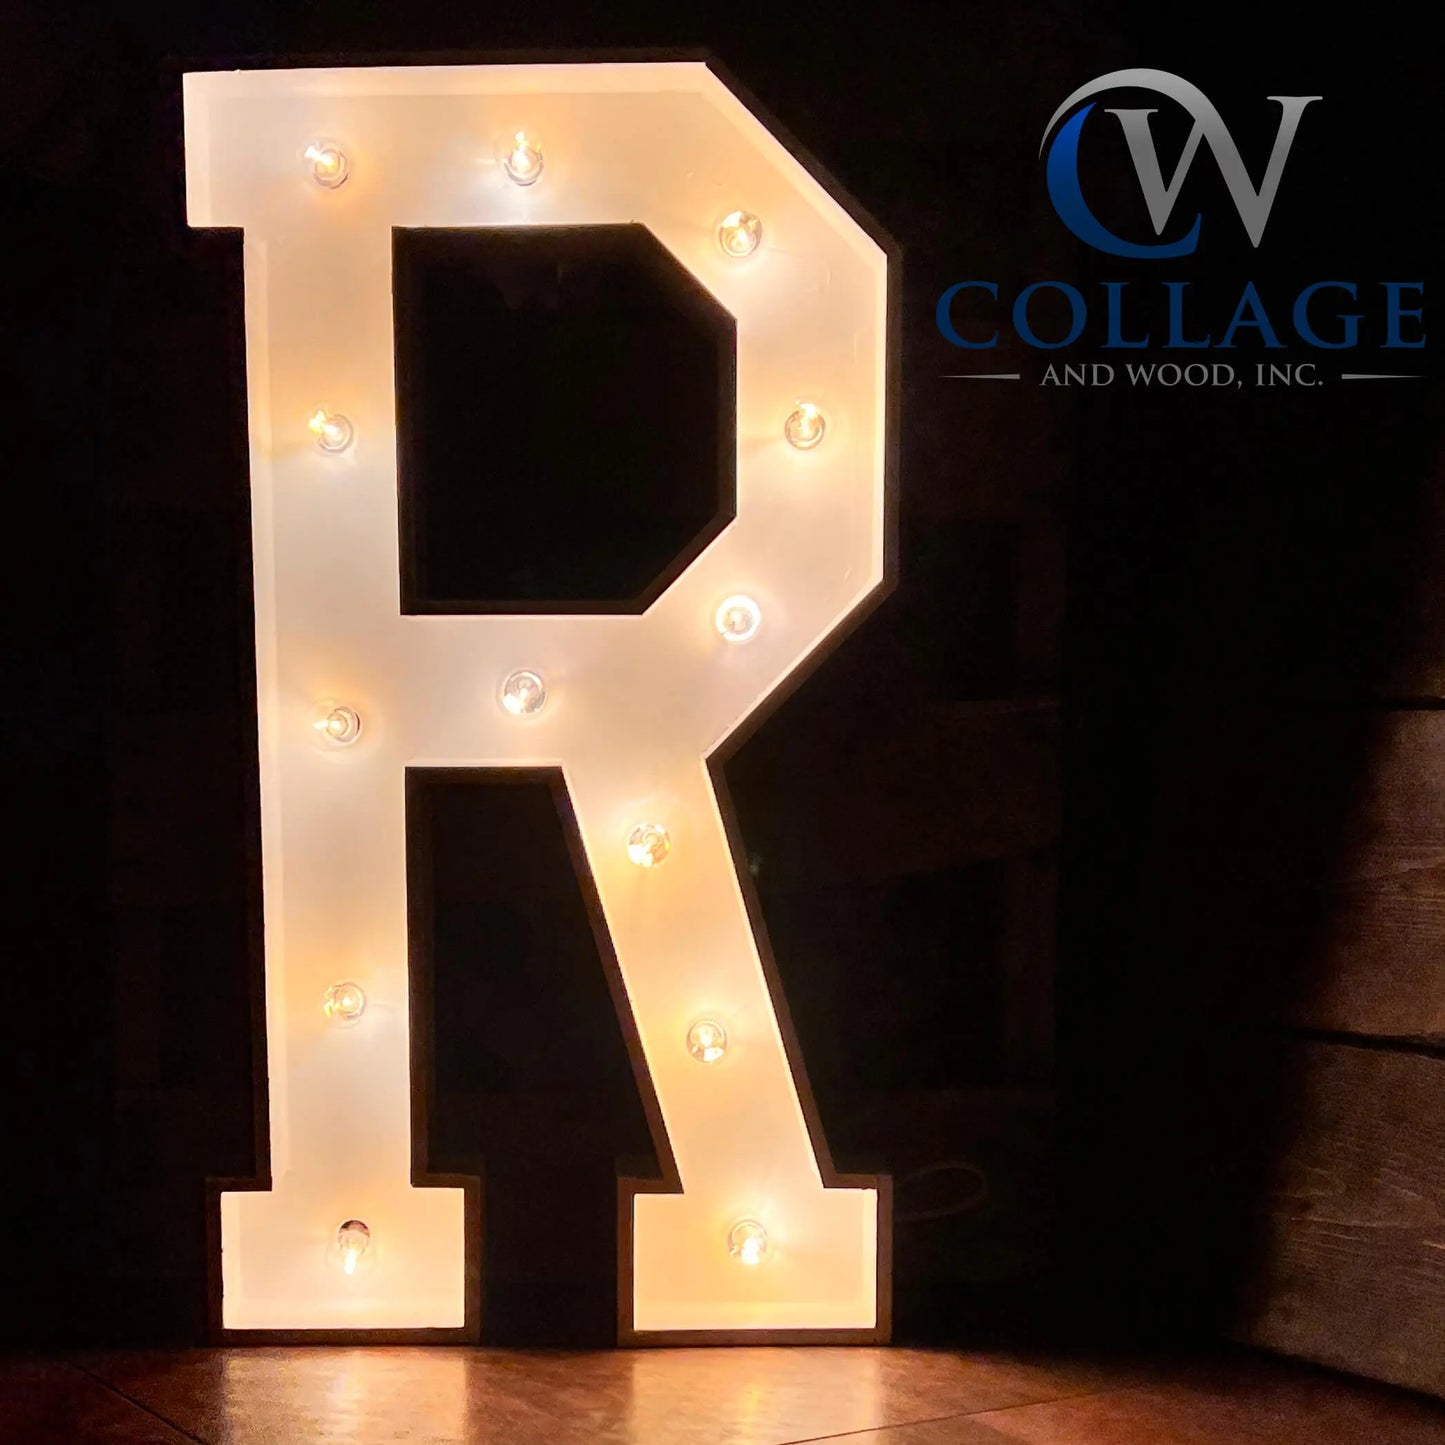 Radiant wooden marquee letter R, stretching 3 feet tall, finished in a bright white hue, illuminated by brilliant LED lights.